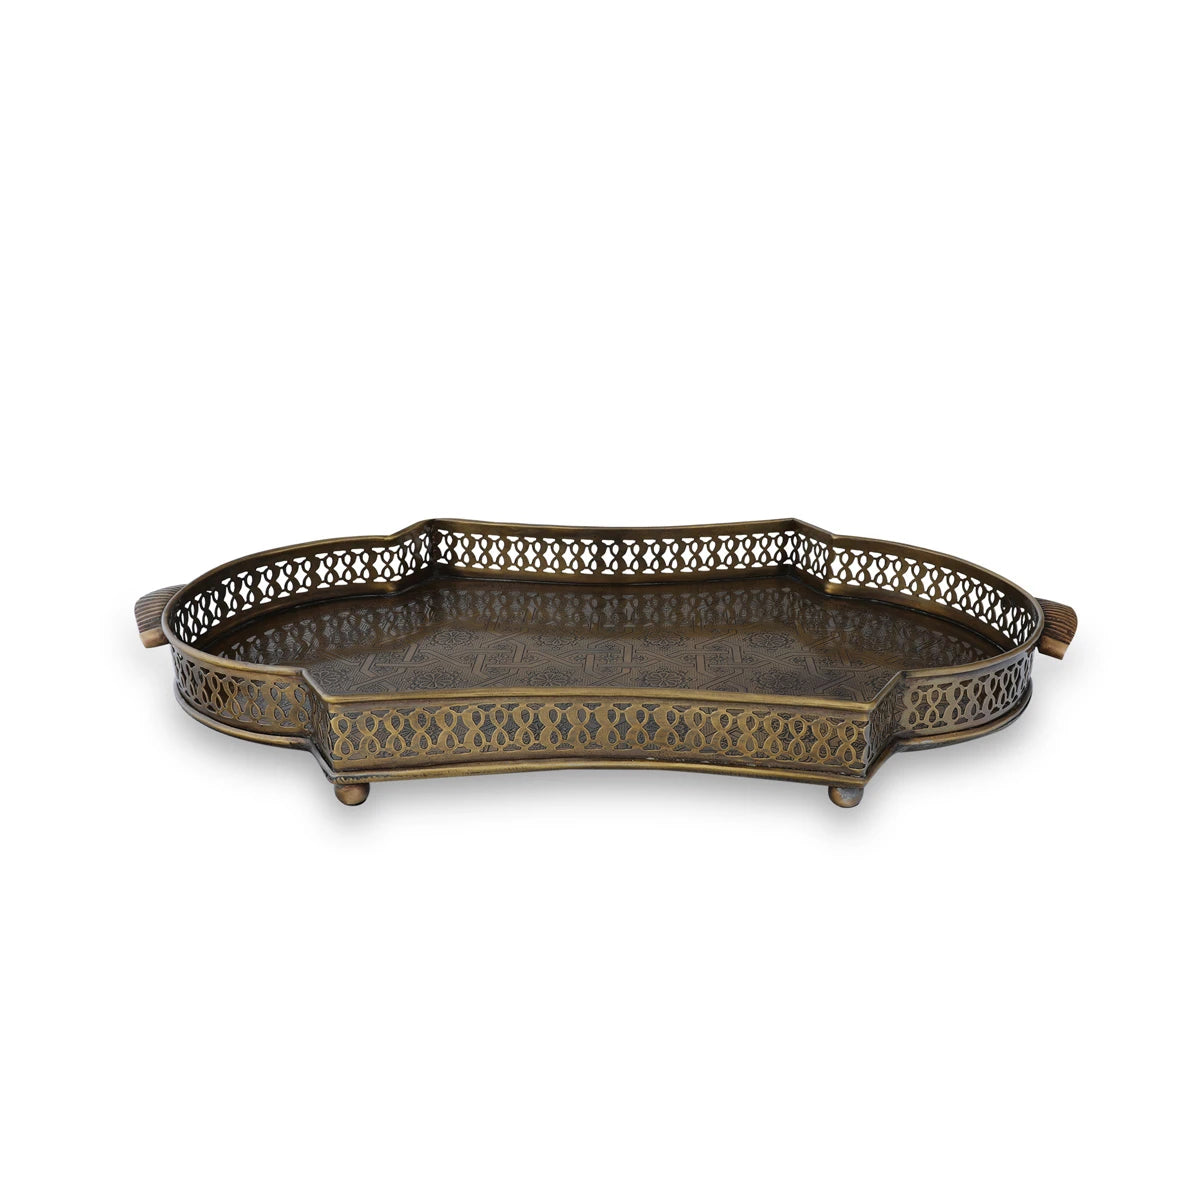 Decorative Brass Metal Tray with fine Detailing's and knobbed base, can be used for storing anything of your choice